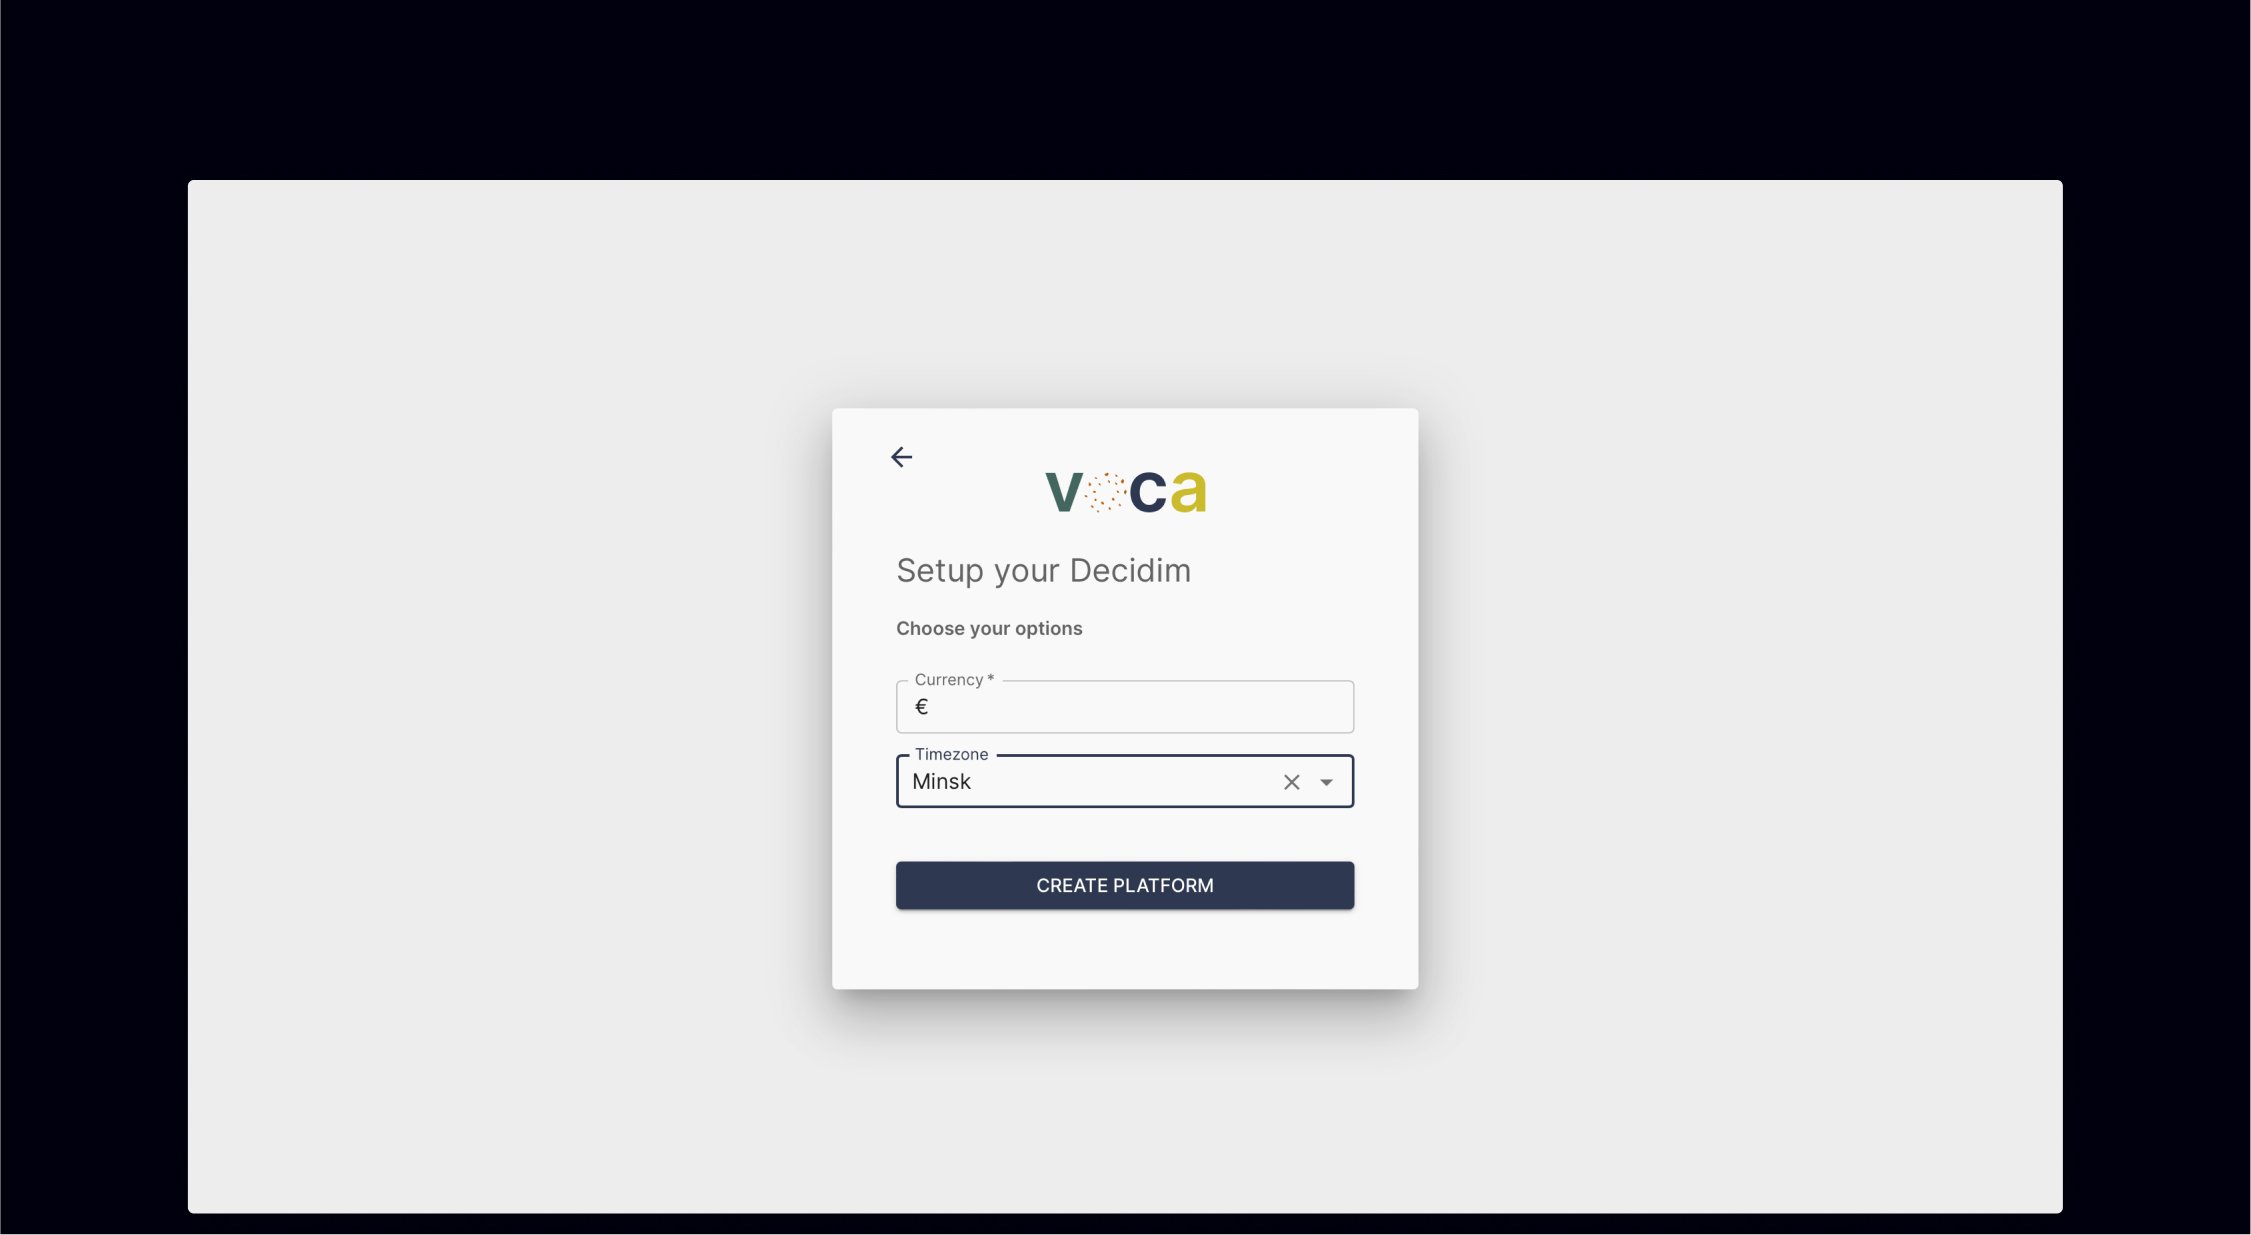 Voca enables the deployment of decidim in an easy and stable way to setup your participatory democracy platform in minutes, no technical knowledge needed, full support.